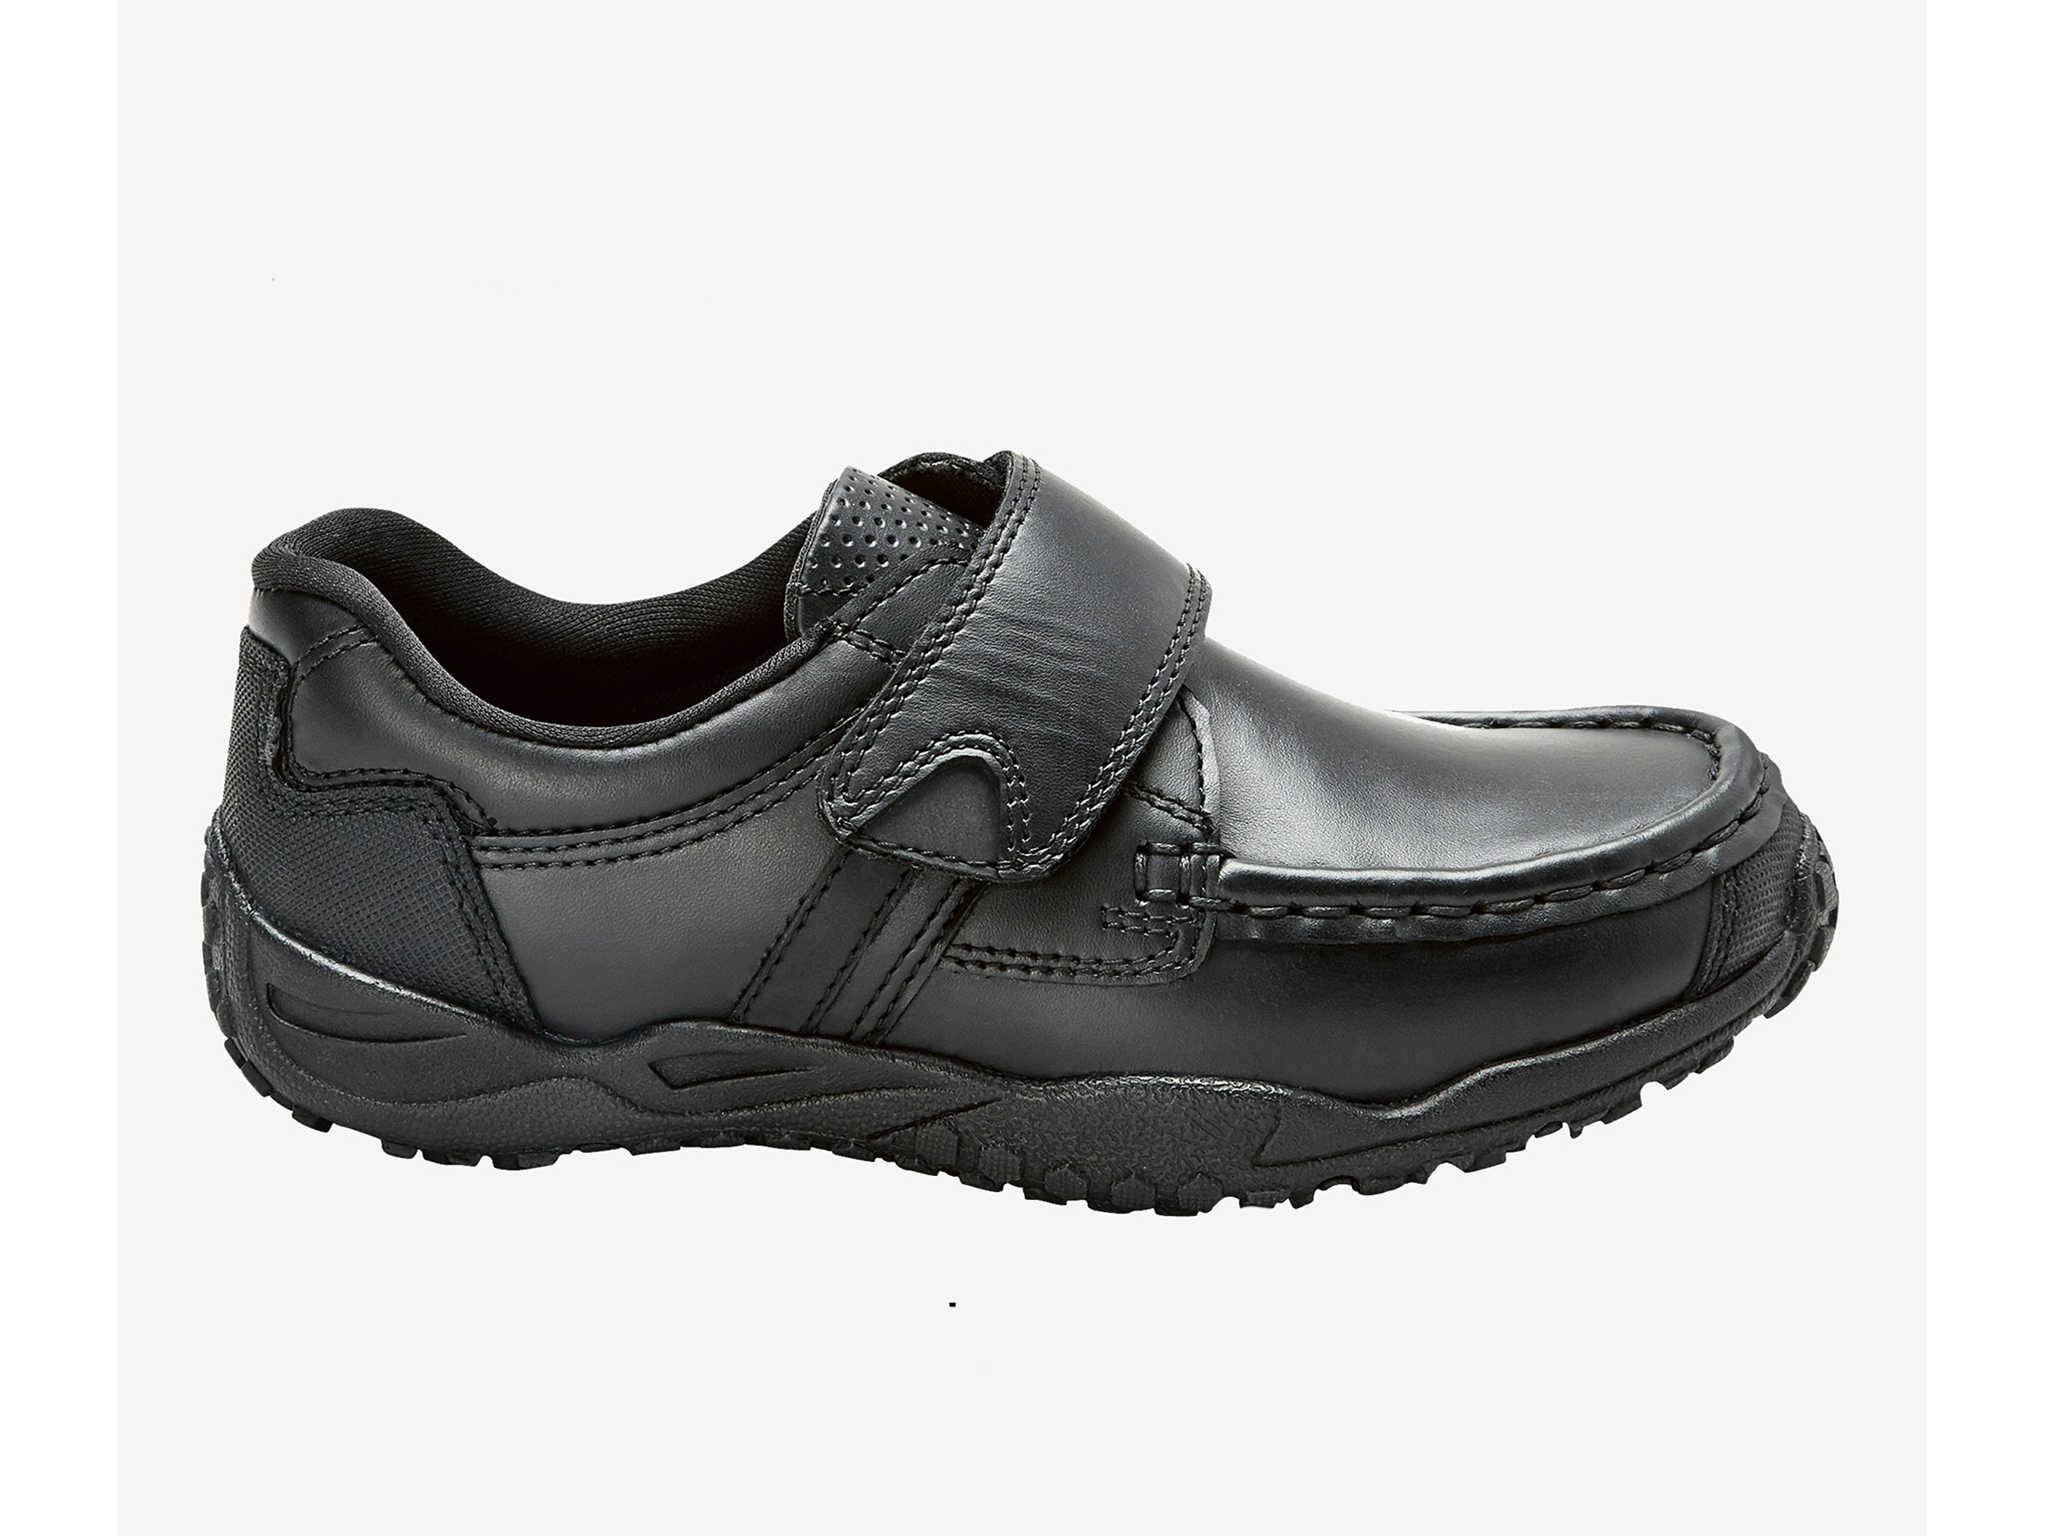 school shoes for 12 year olds